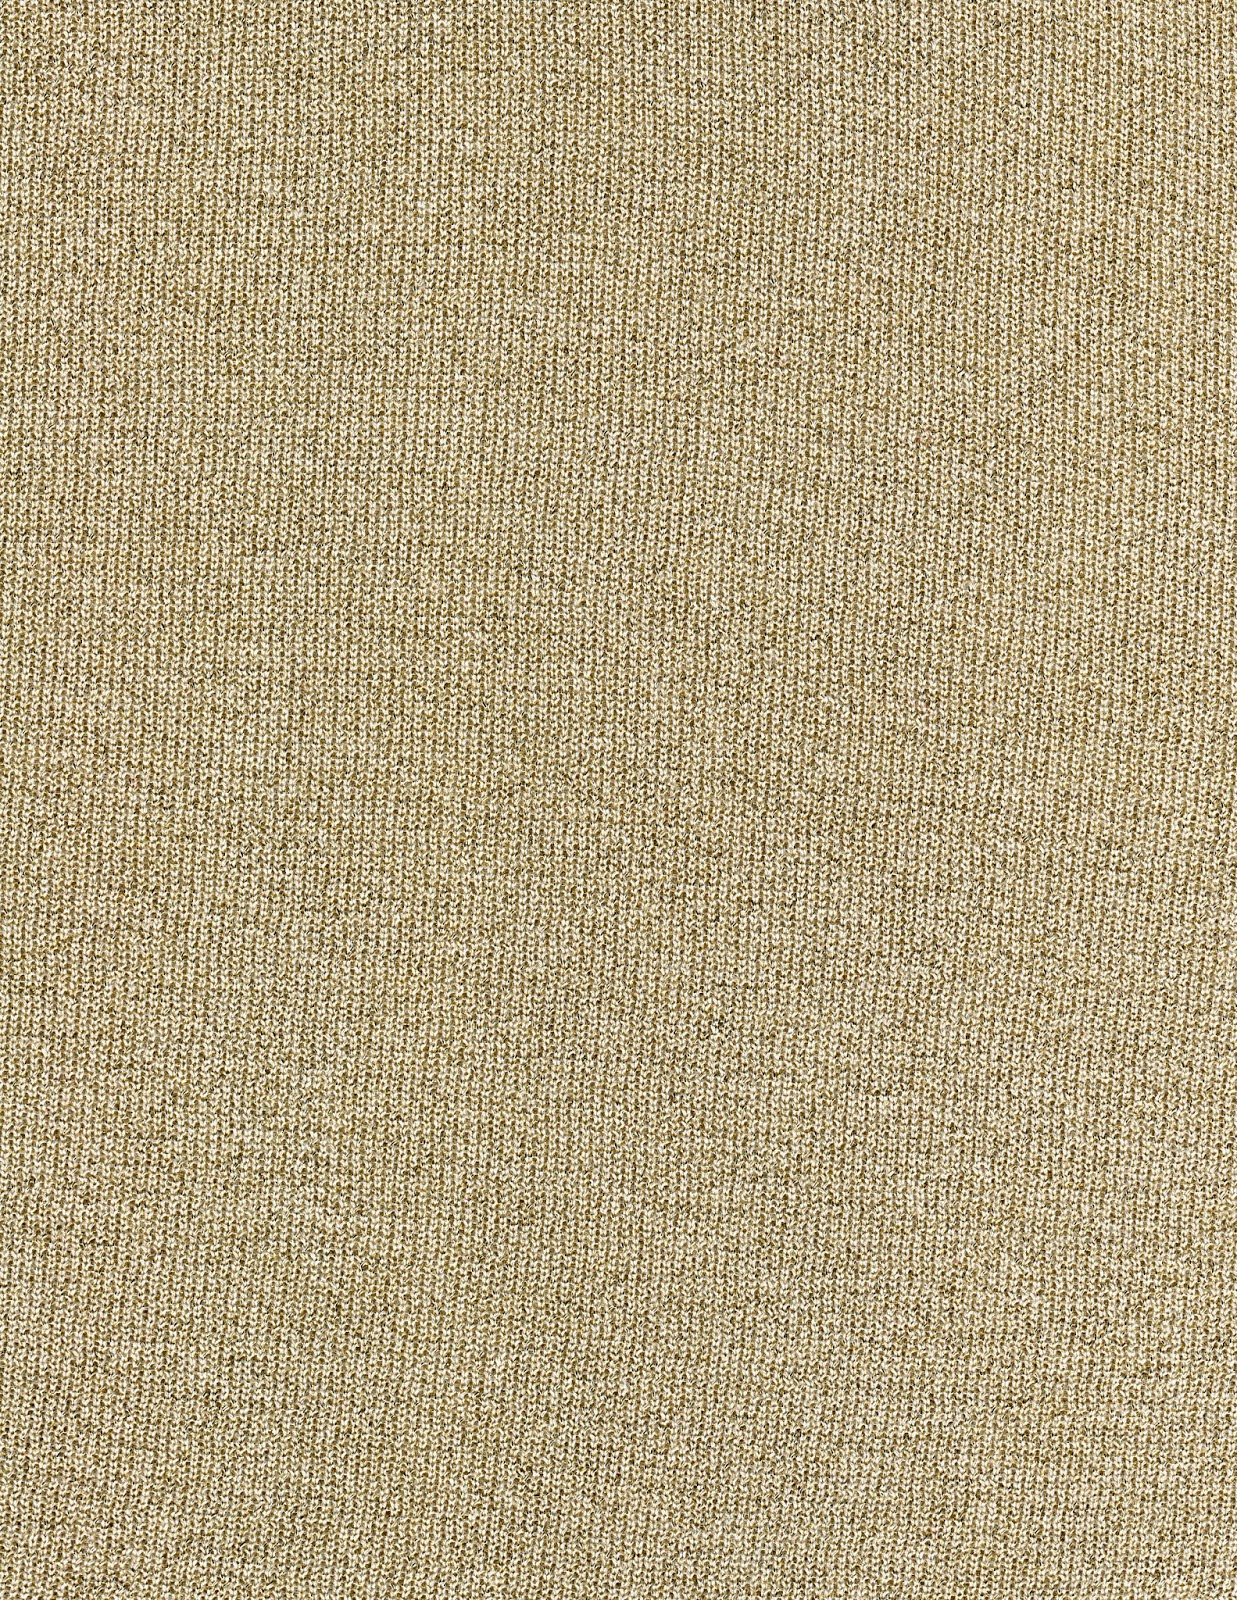 Meticulous Madness: Freebie Friday - Subtle Fabric Textures